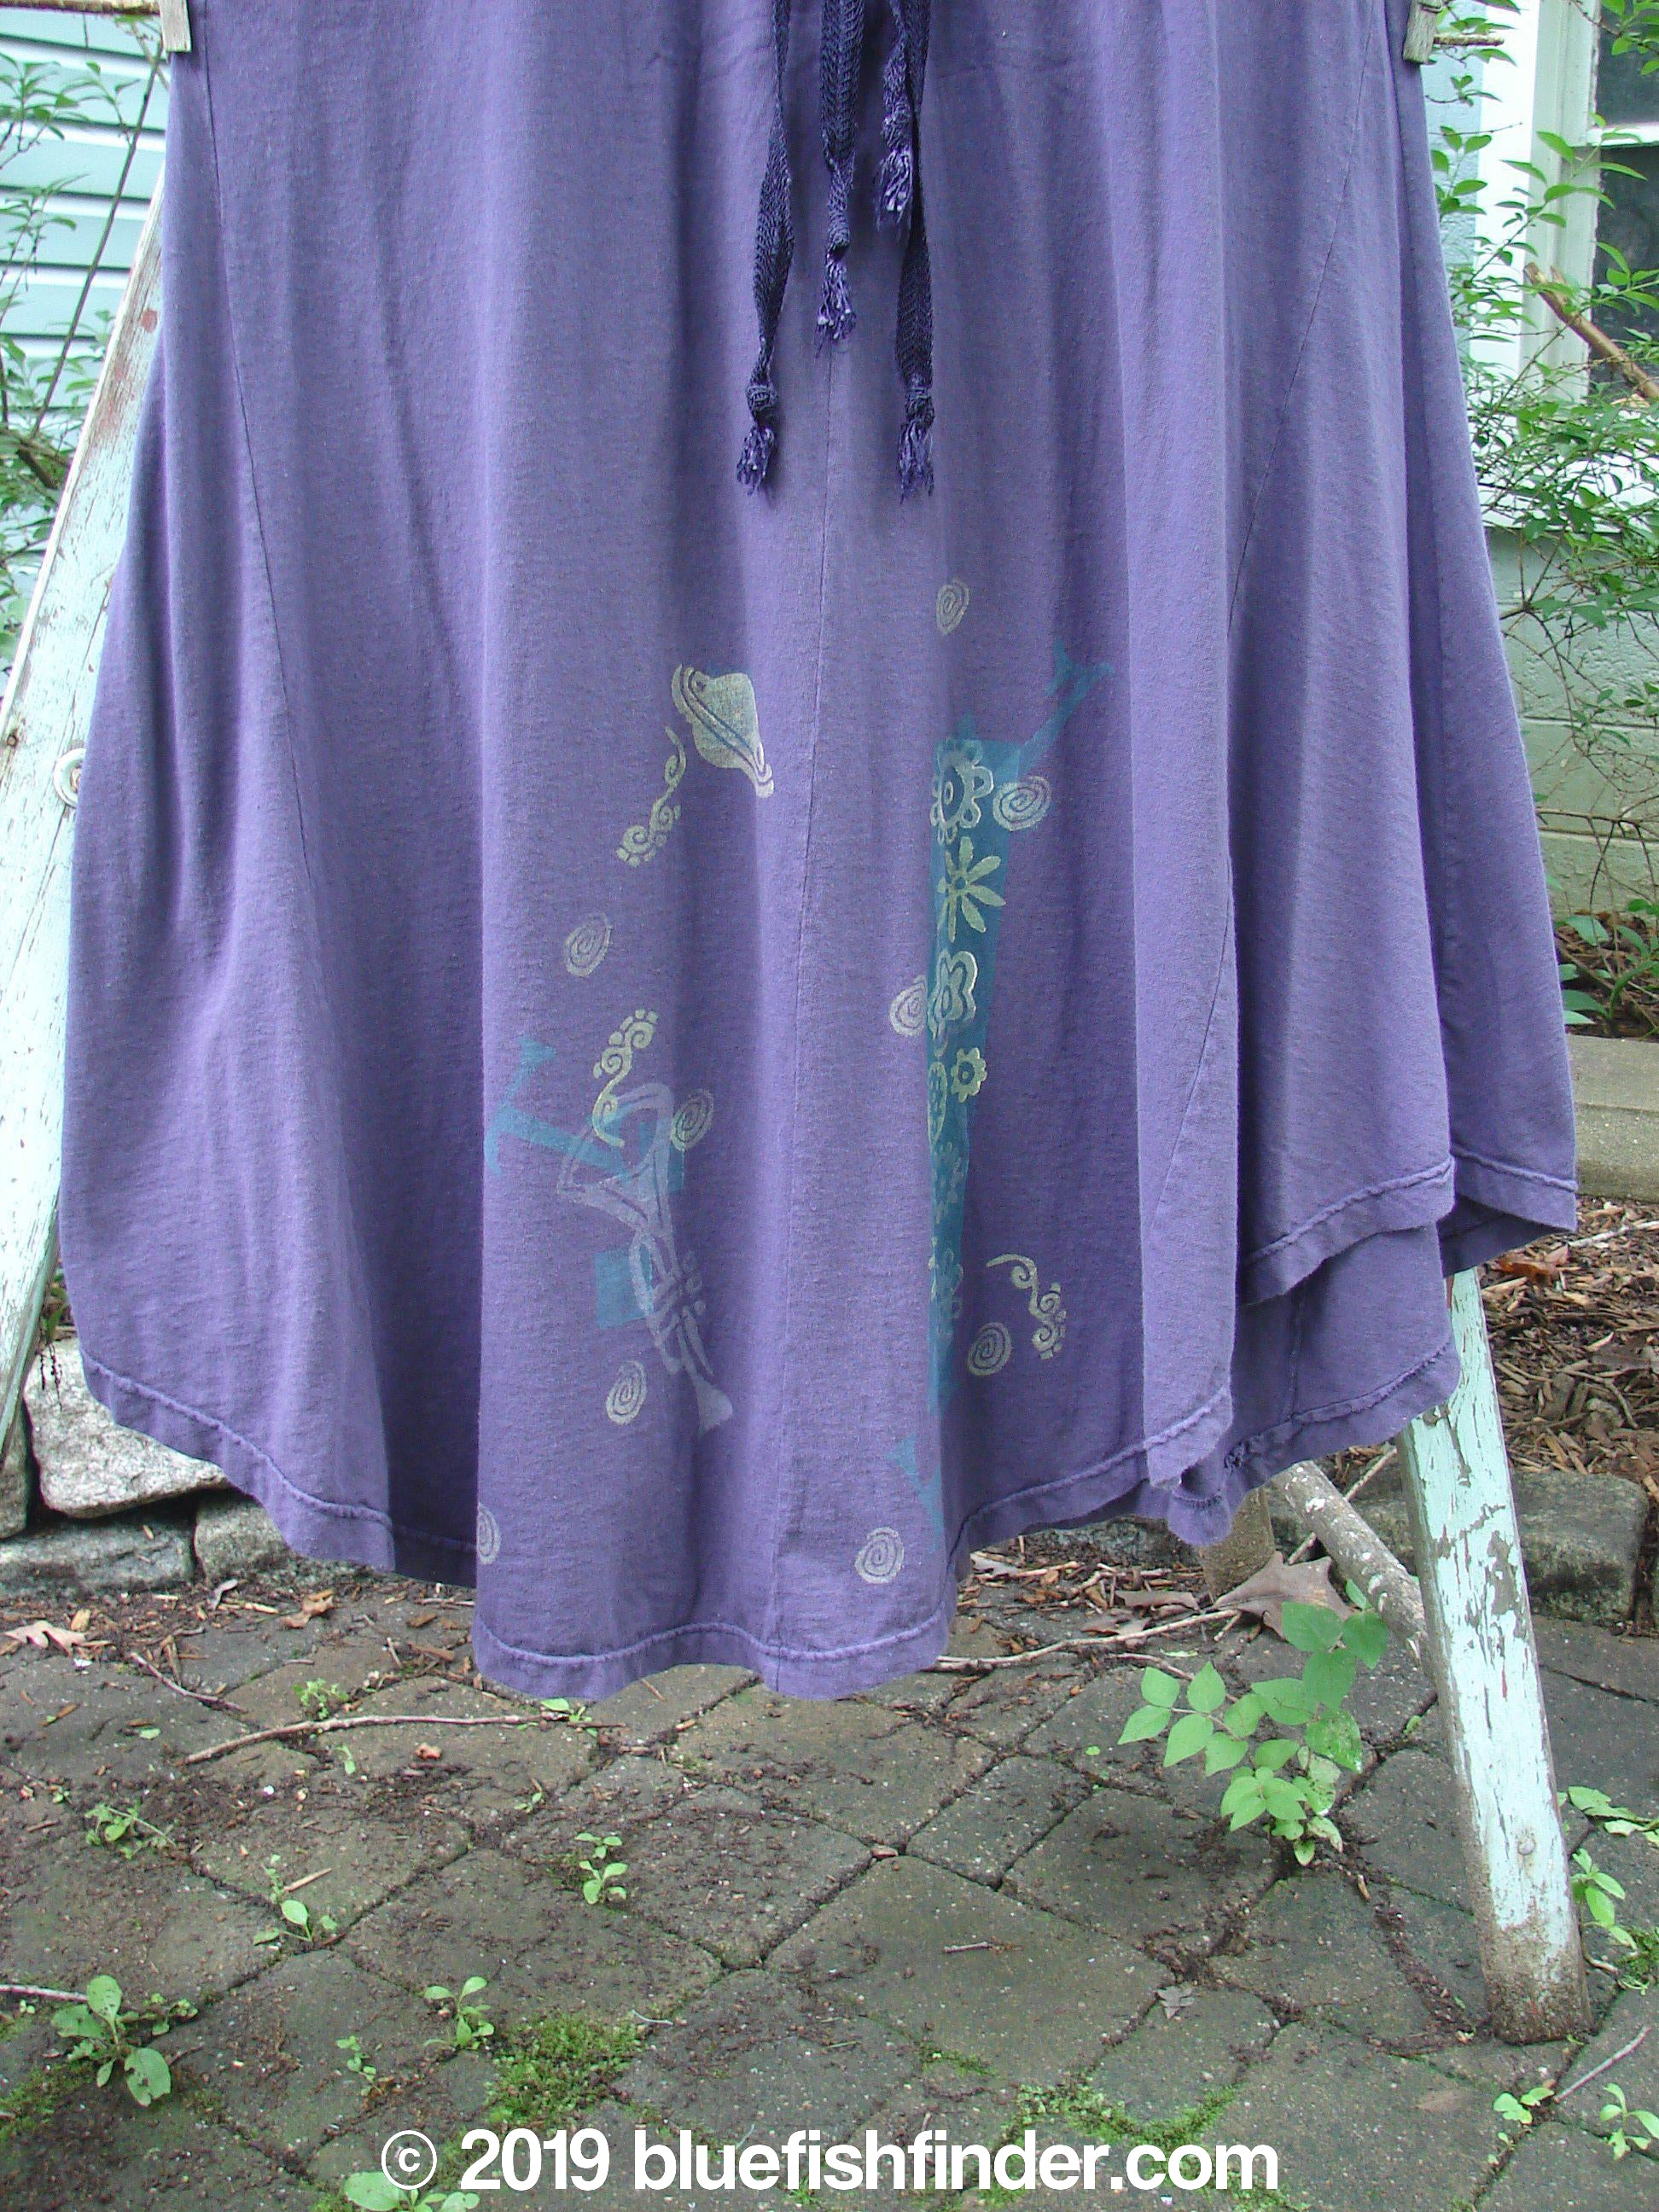 1994 Spin Jumper Mixed Purple Nuit Size 2: A purple dress on a white stand with a design on it, featuring an empire waist, V-shaped neckline, and sweeping hemline.